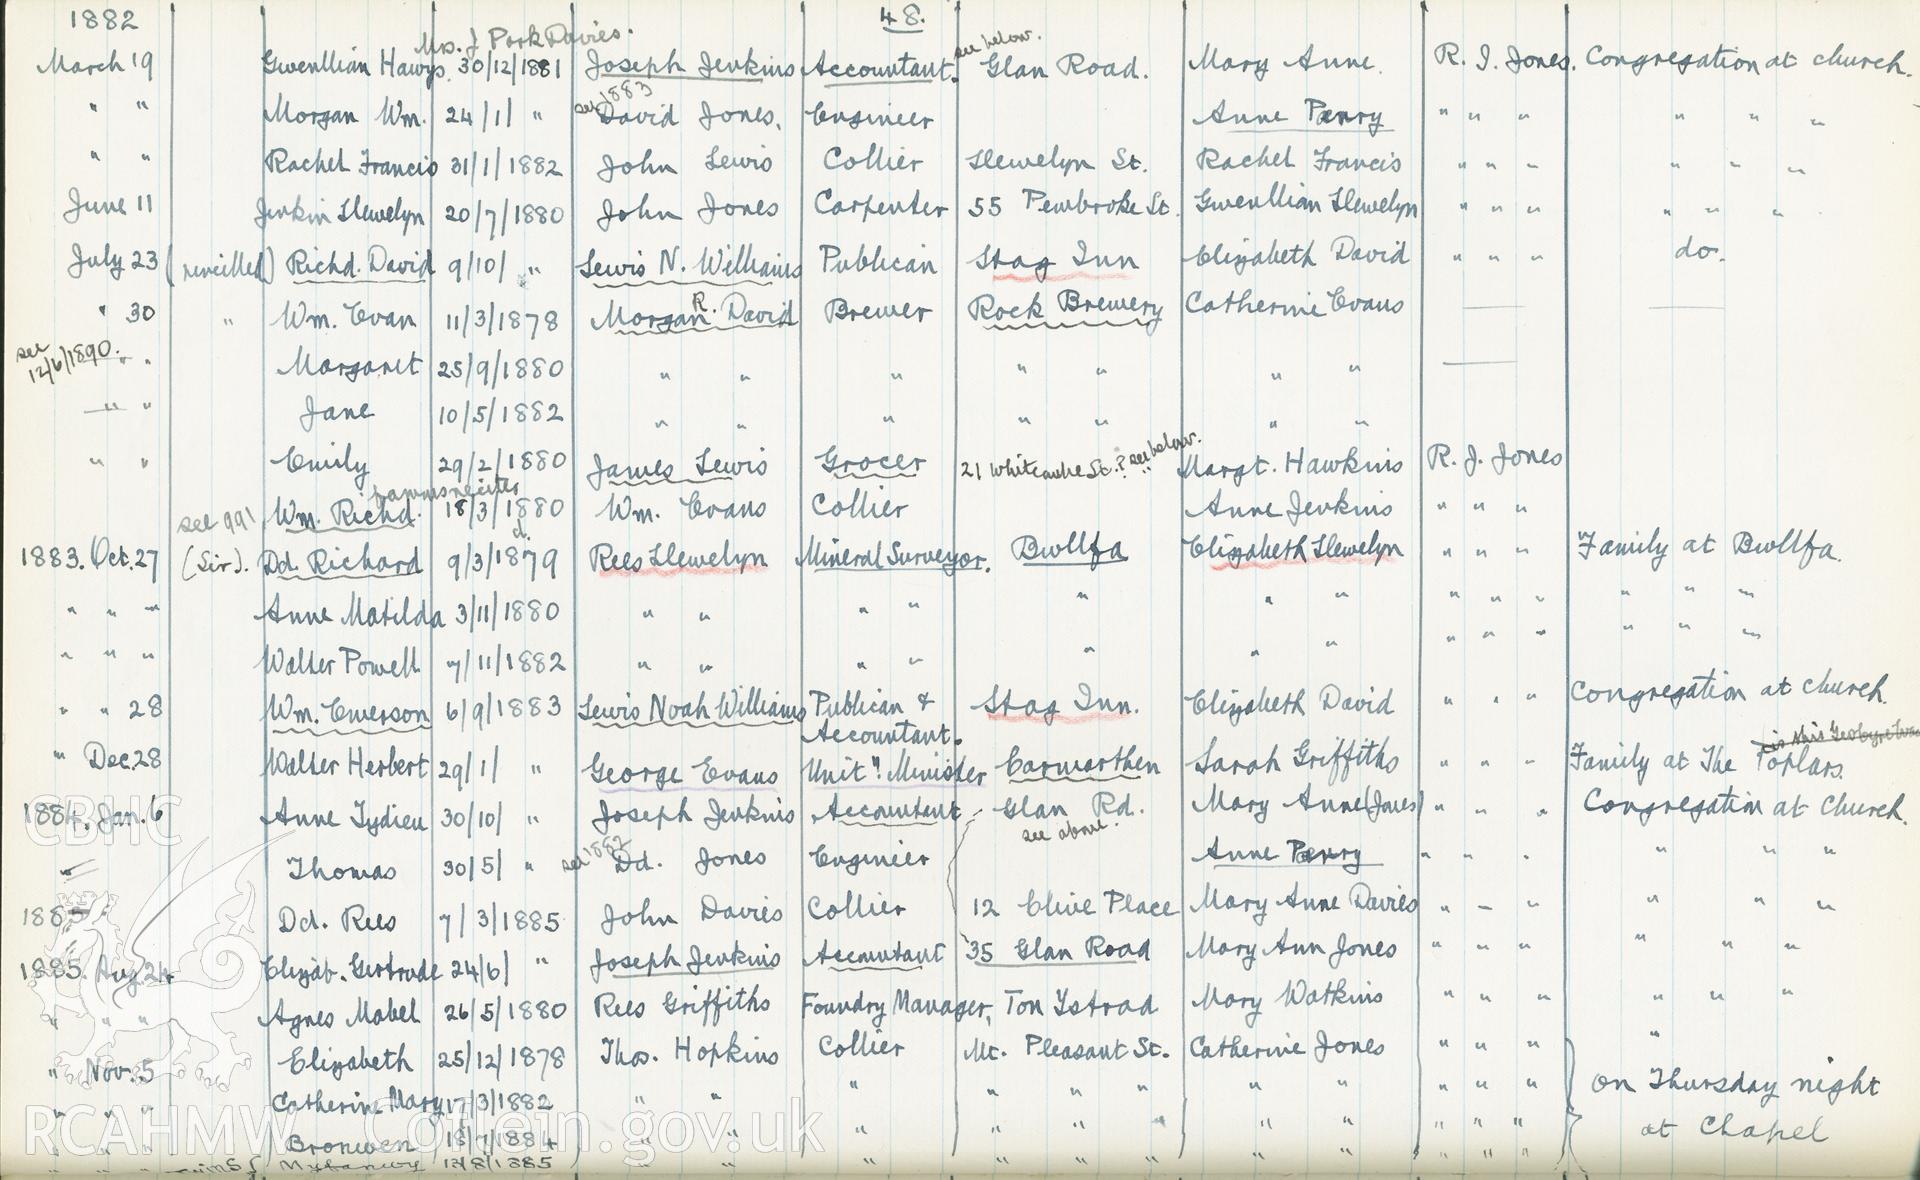 "Baptism Registered" book for Hen Dy Cwrdd, made between April 19th and 28th, 1941, by W. W. Price. Page listing baptisms from 19th March 1882 to 5th November 1885. Donated to the RCAHMW as part of the Digital Dissent Project.